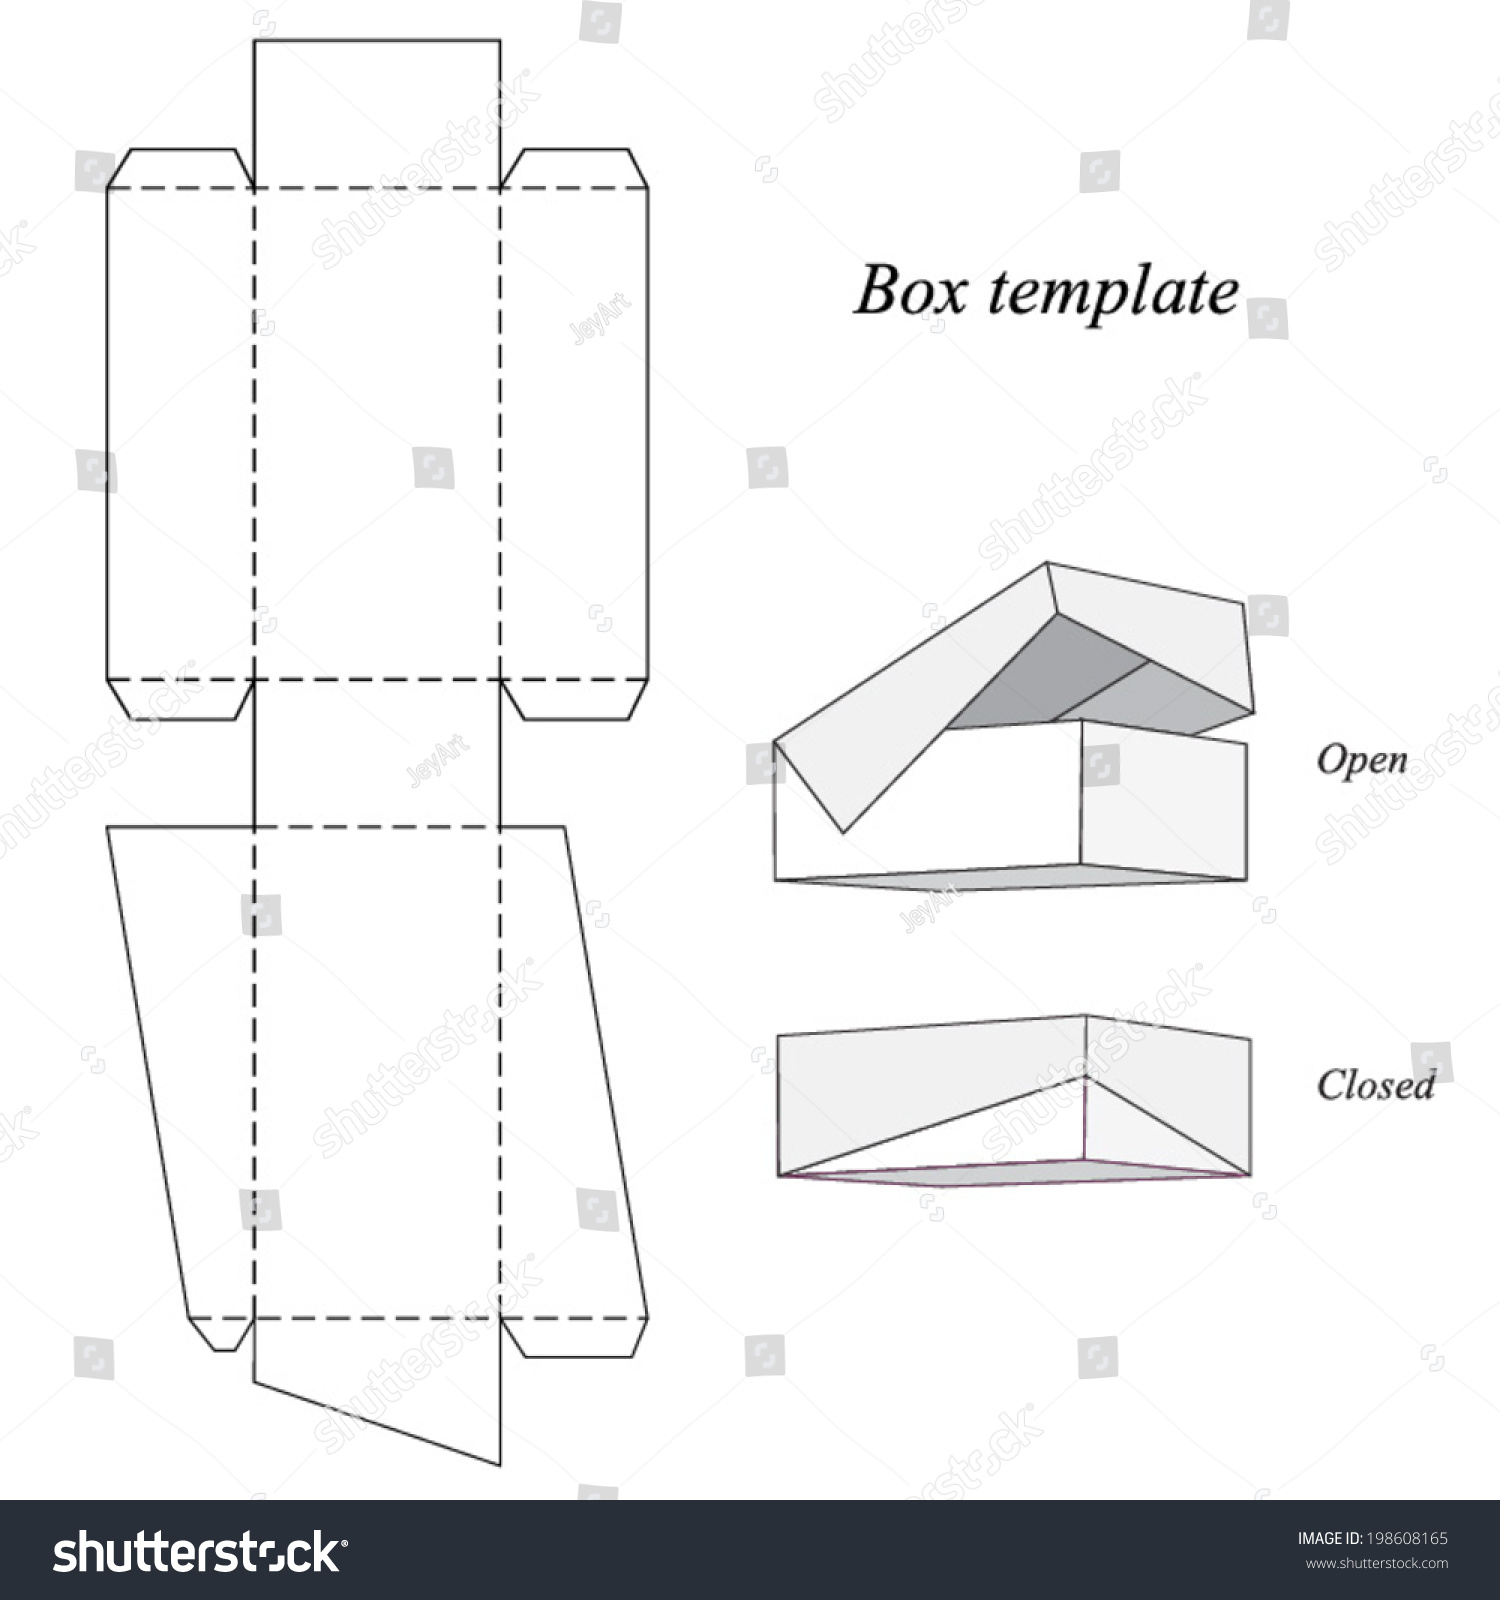 Free Printable Box Template With Lid